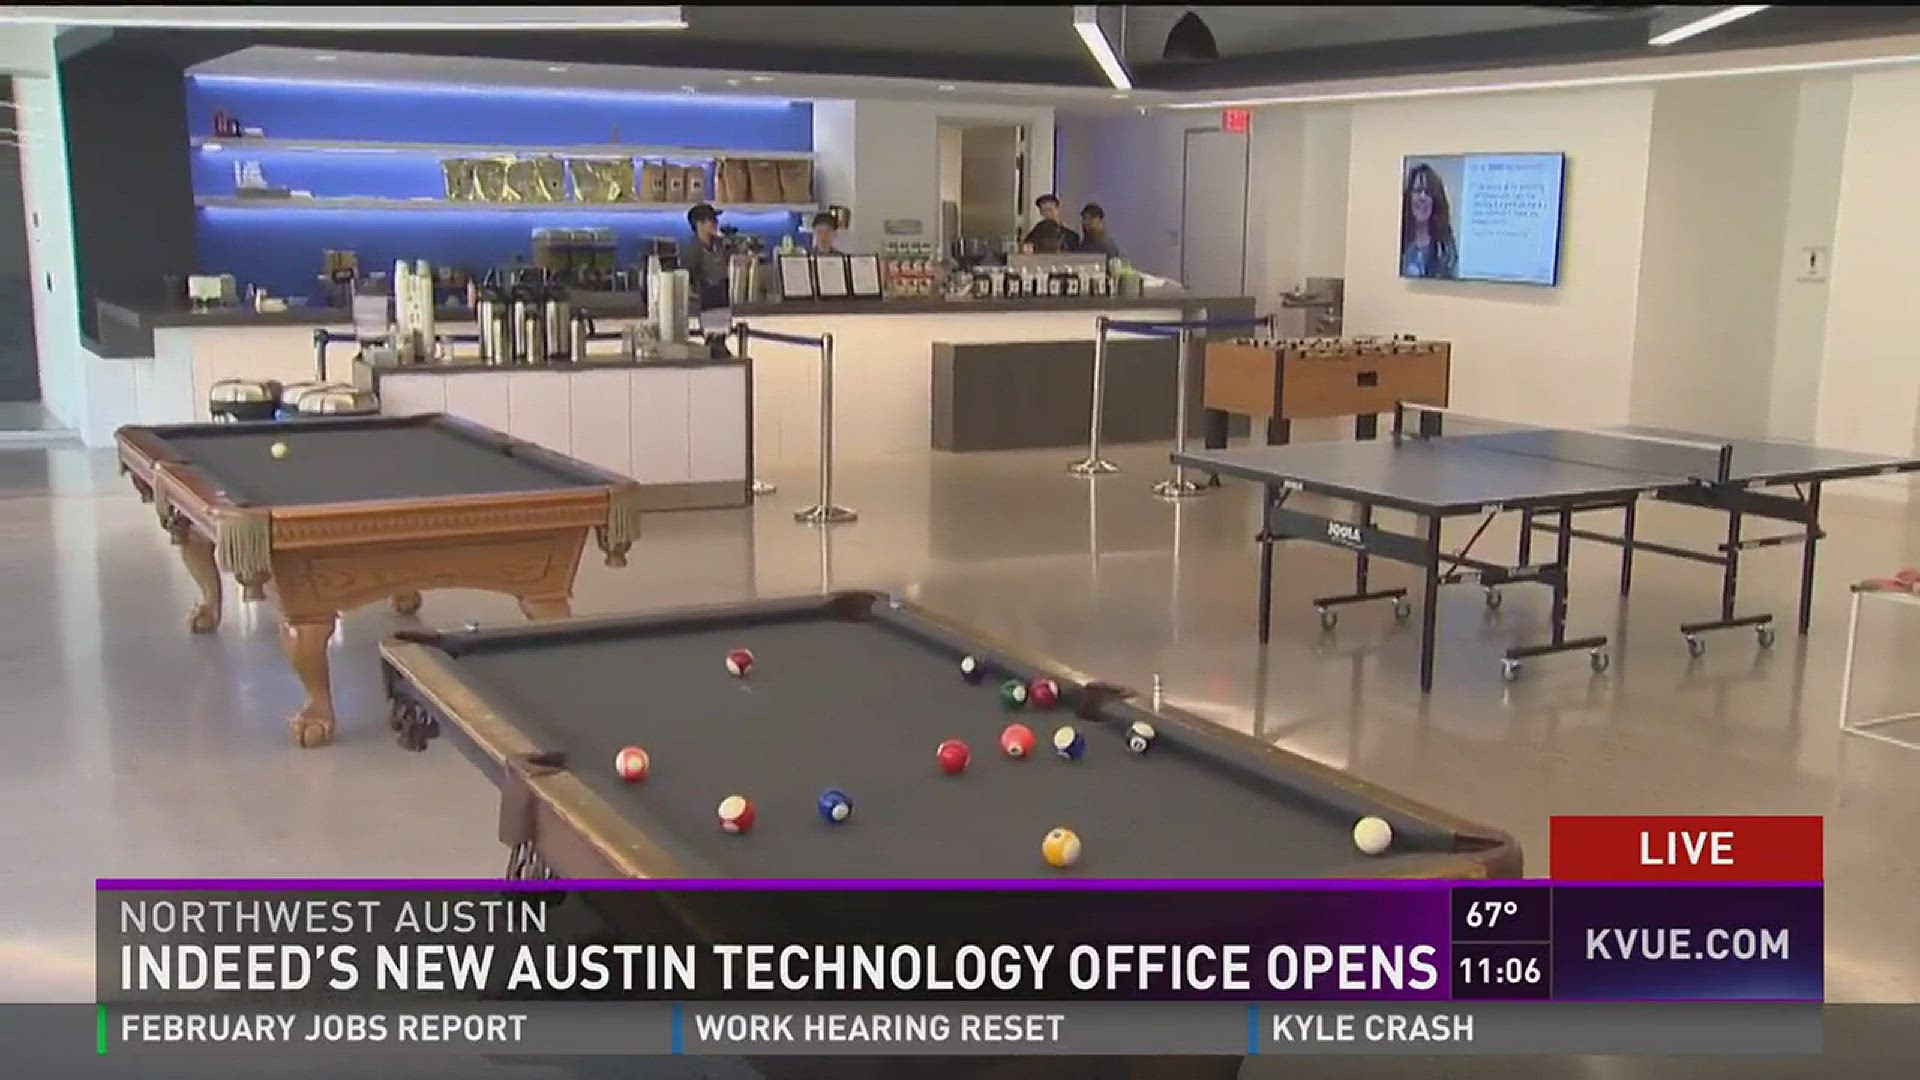 Indeed's new Austin technology office opens